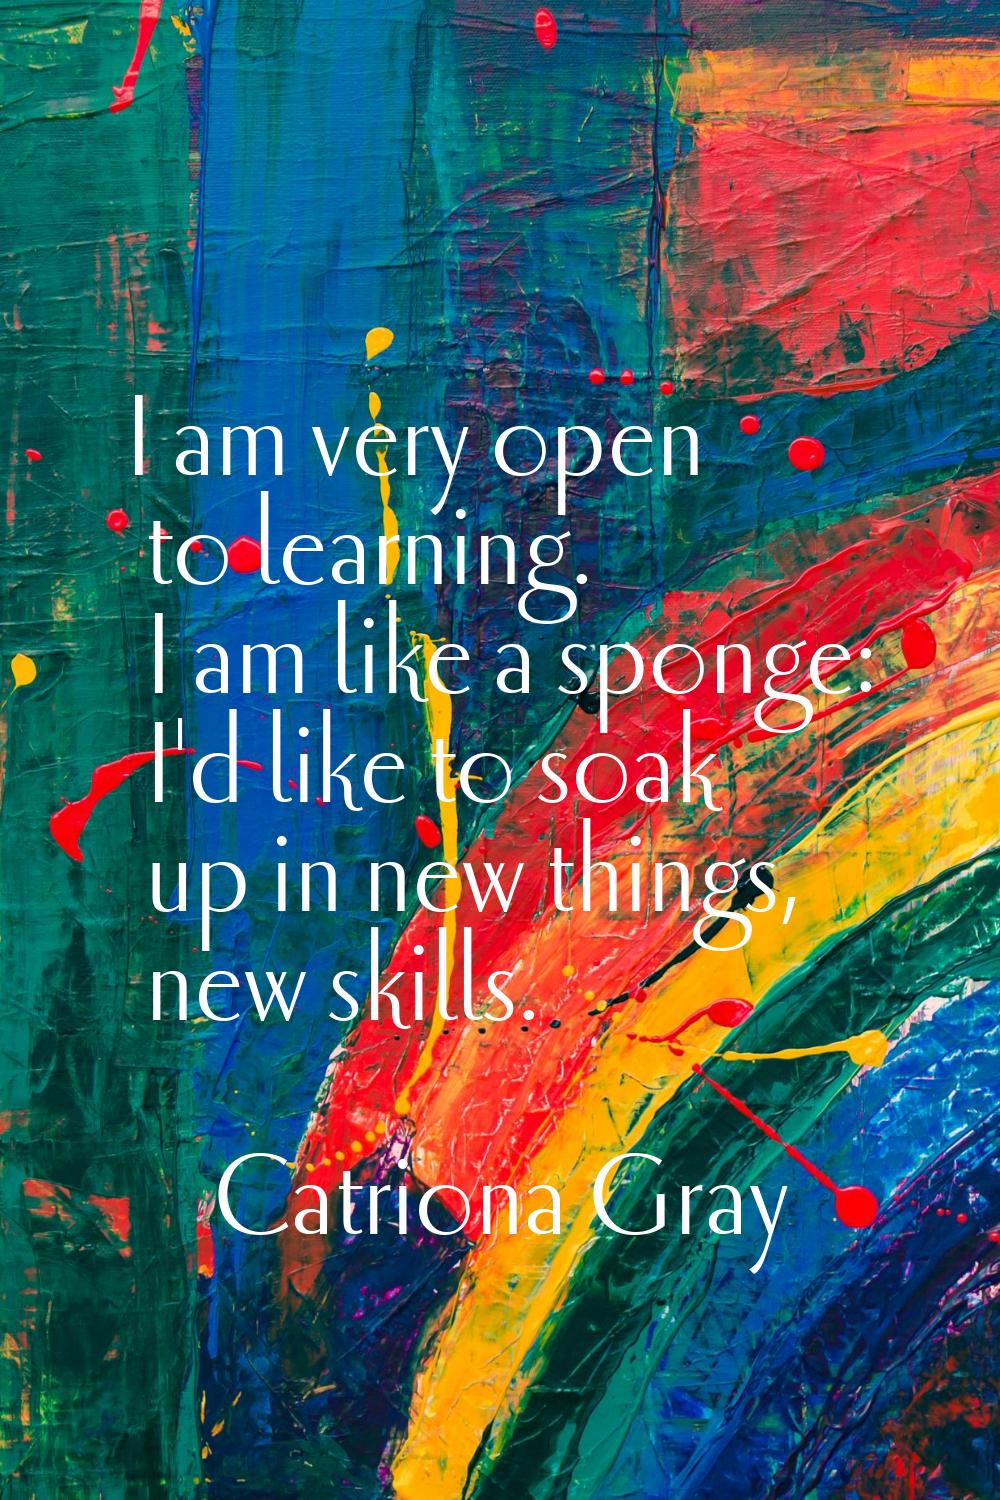 I am very open to learning. I am like a sponge: I'd like to soak up in new things, new skills.